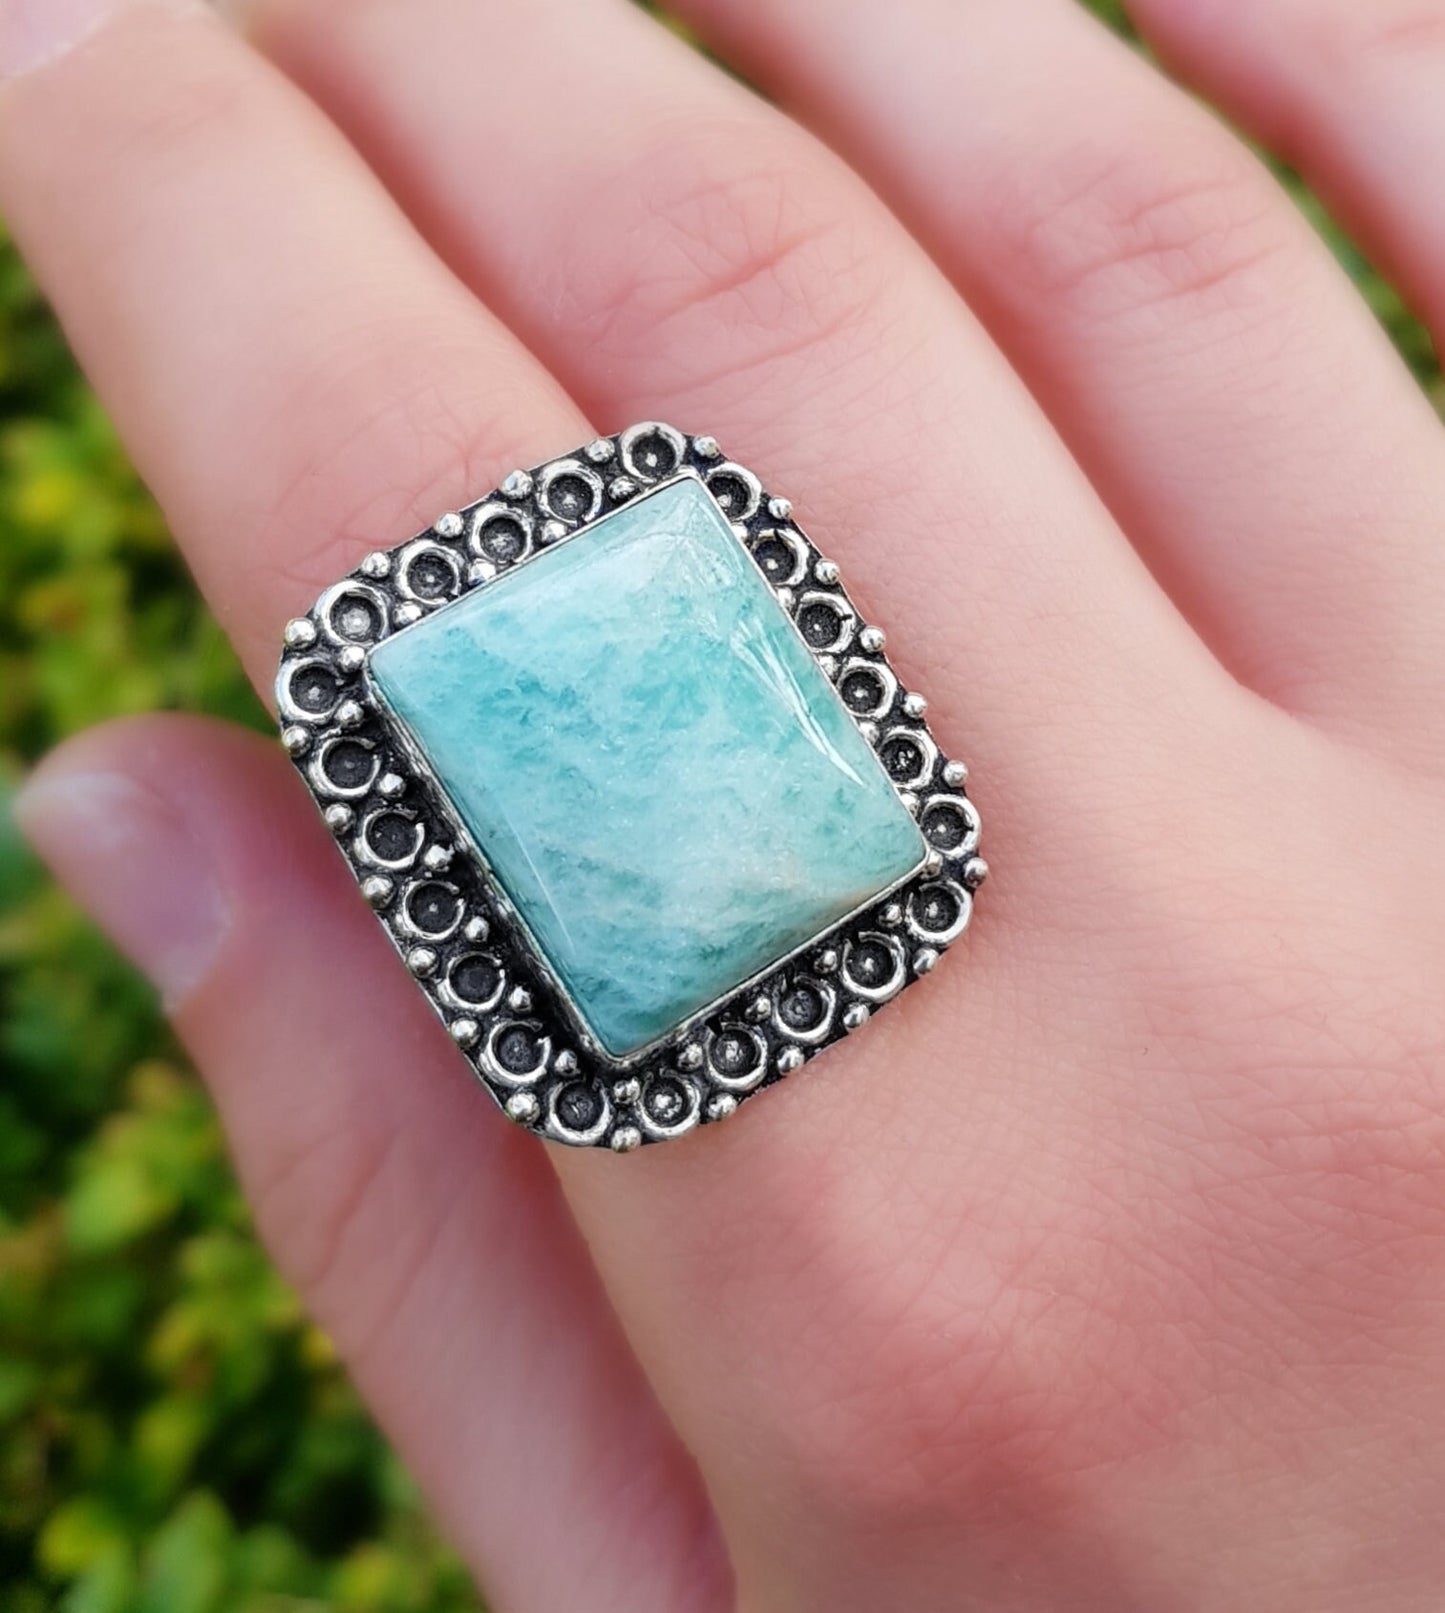 Amazonite Statement Ring Sterling Silver Gemstone Ring Size US 8 Boho Ring Unique Gift GypsyJewelry Ethnic Ring One Of A Kind Jewelry